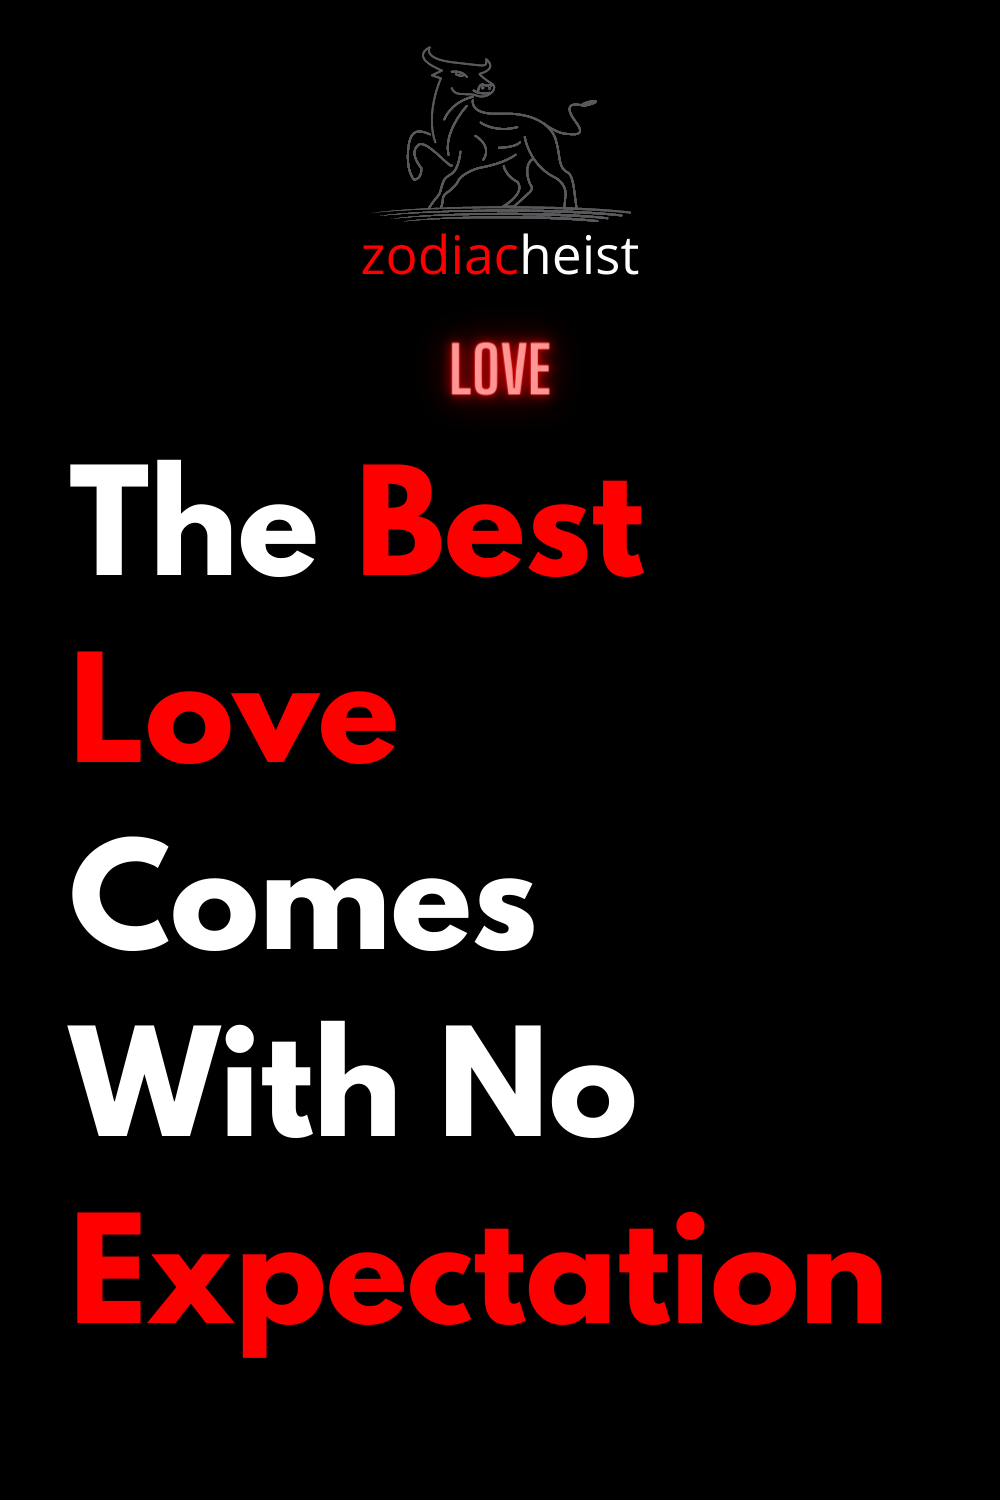 The Best Love Comes With No Expectation